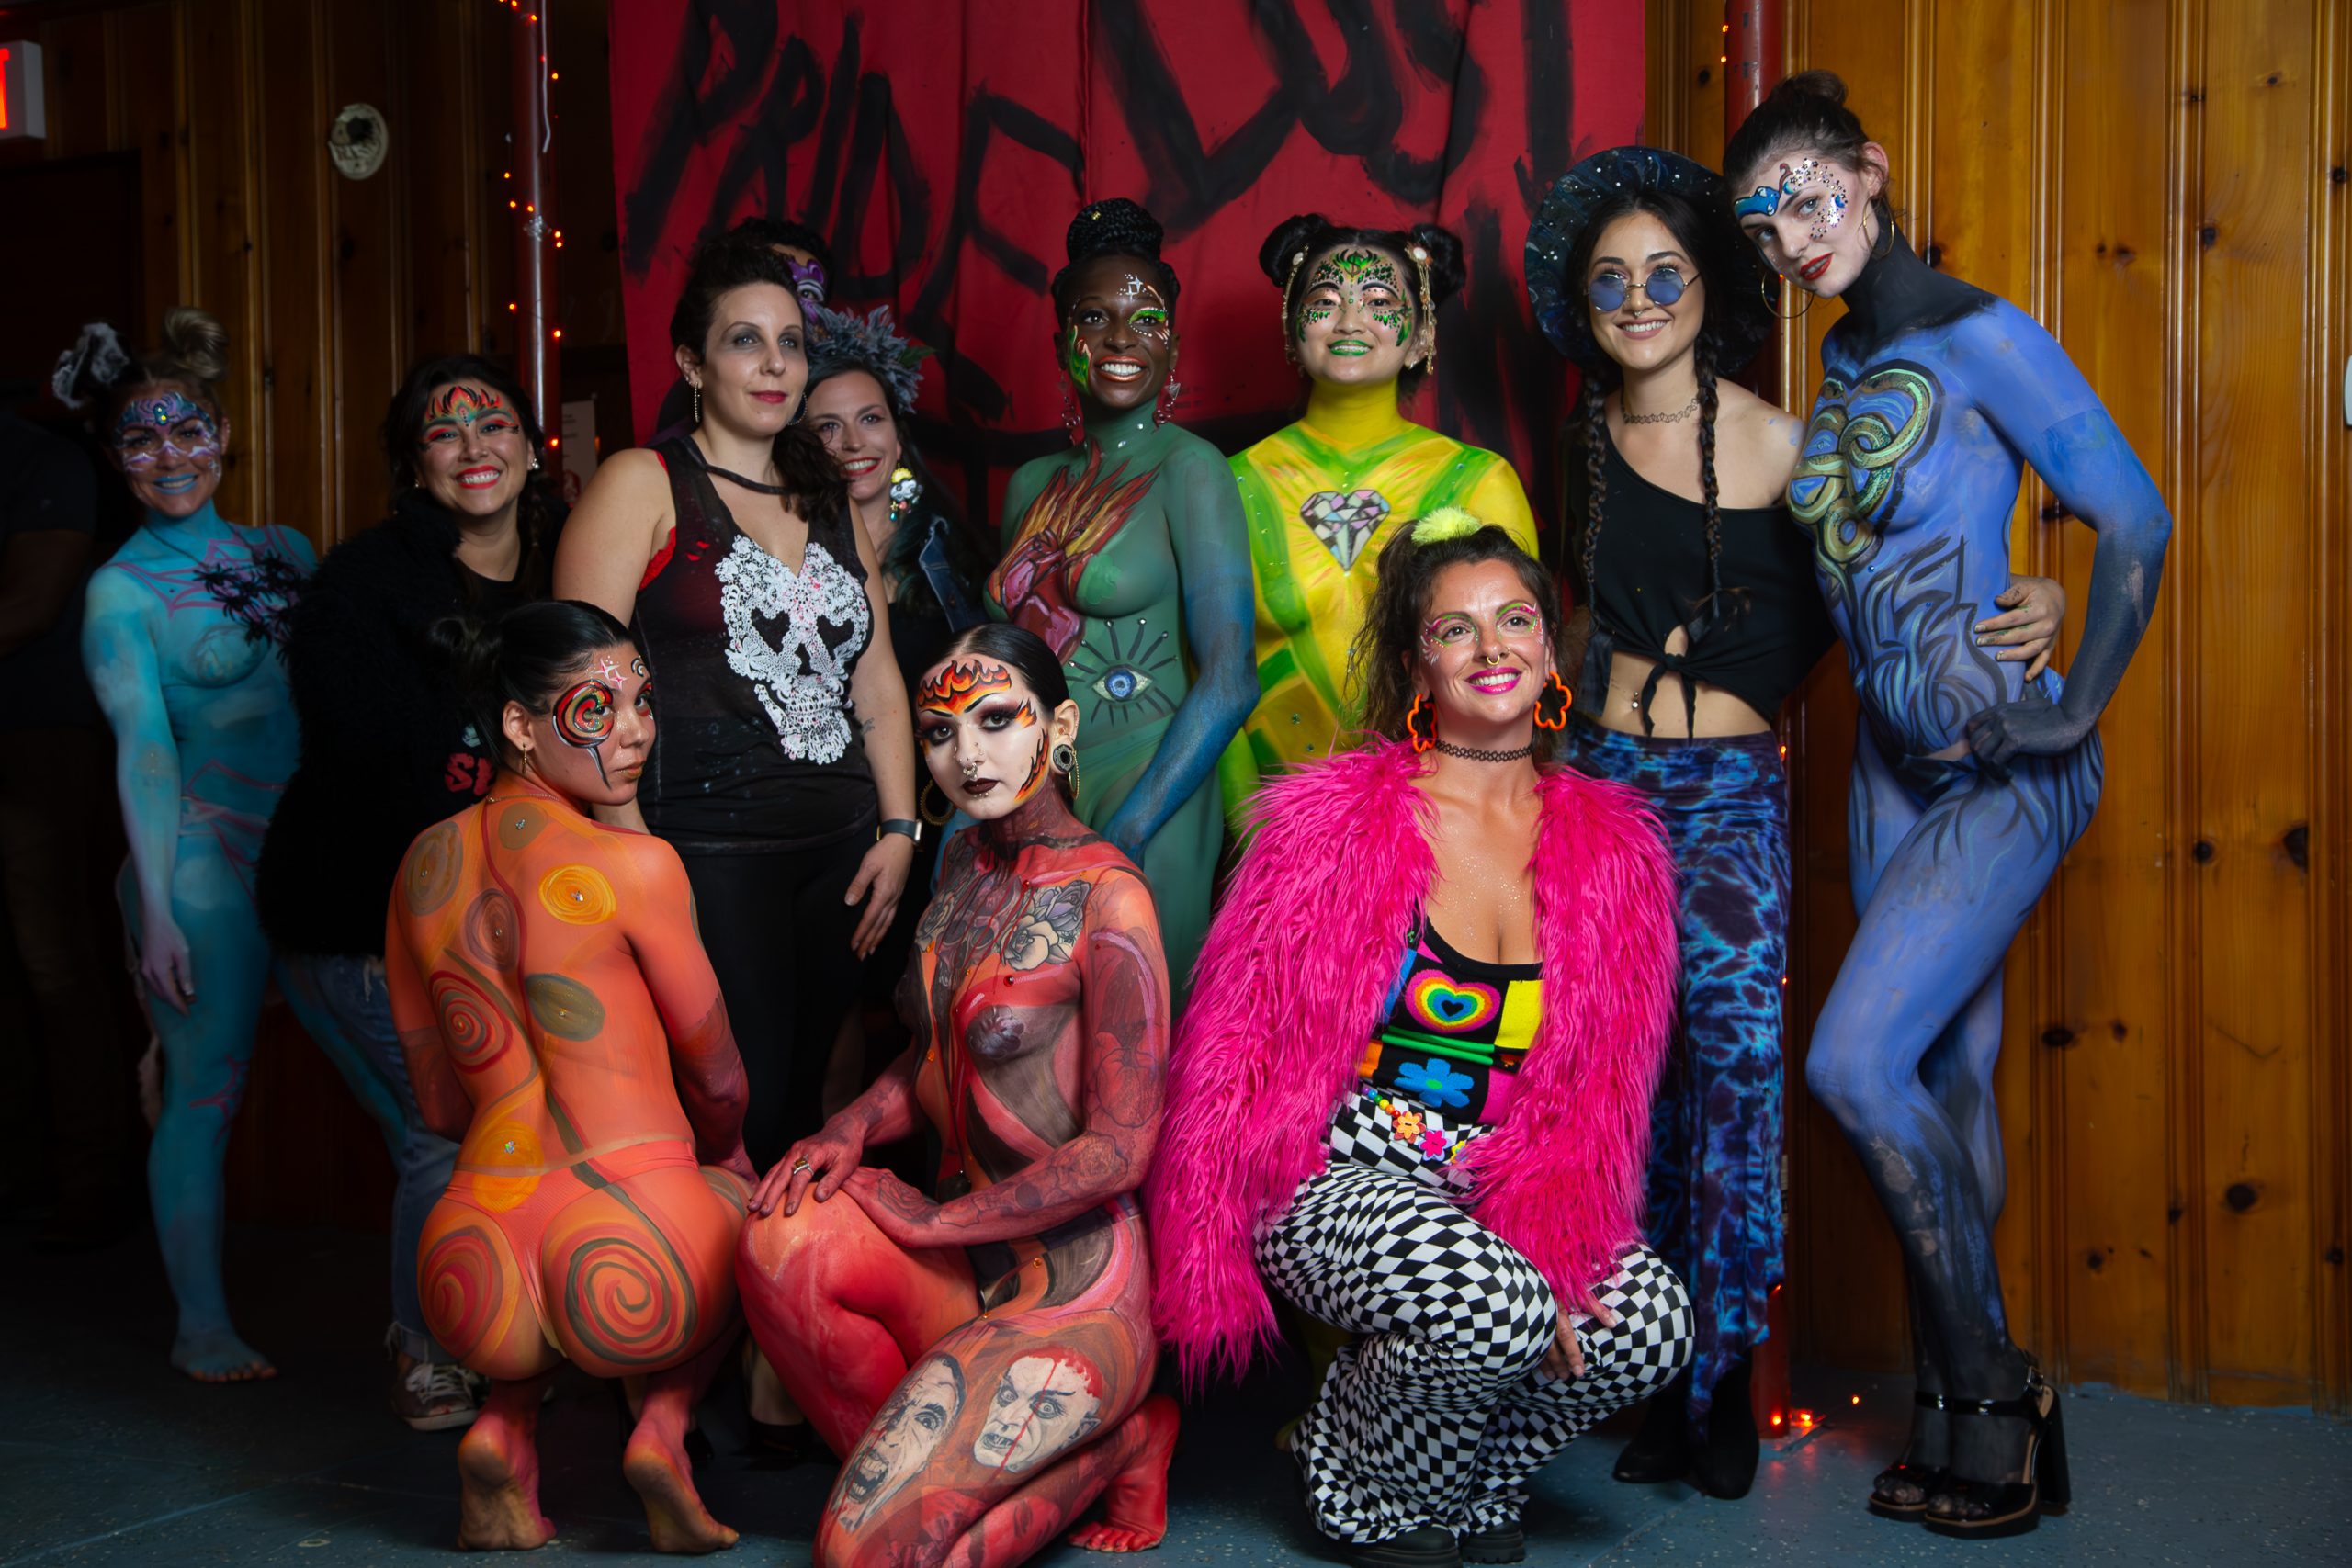 Models for Right Mind Syracuse strip down to nearly nothing but bright colors and intricate patterns of stylized body paint.